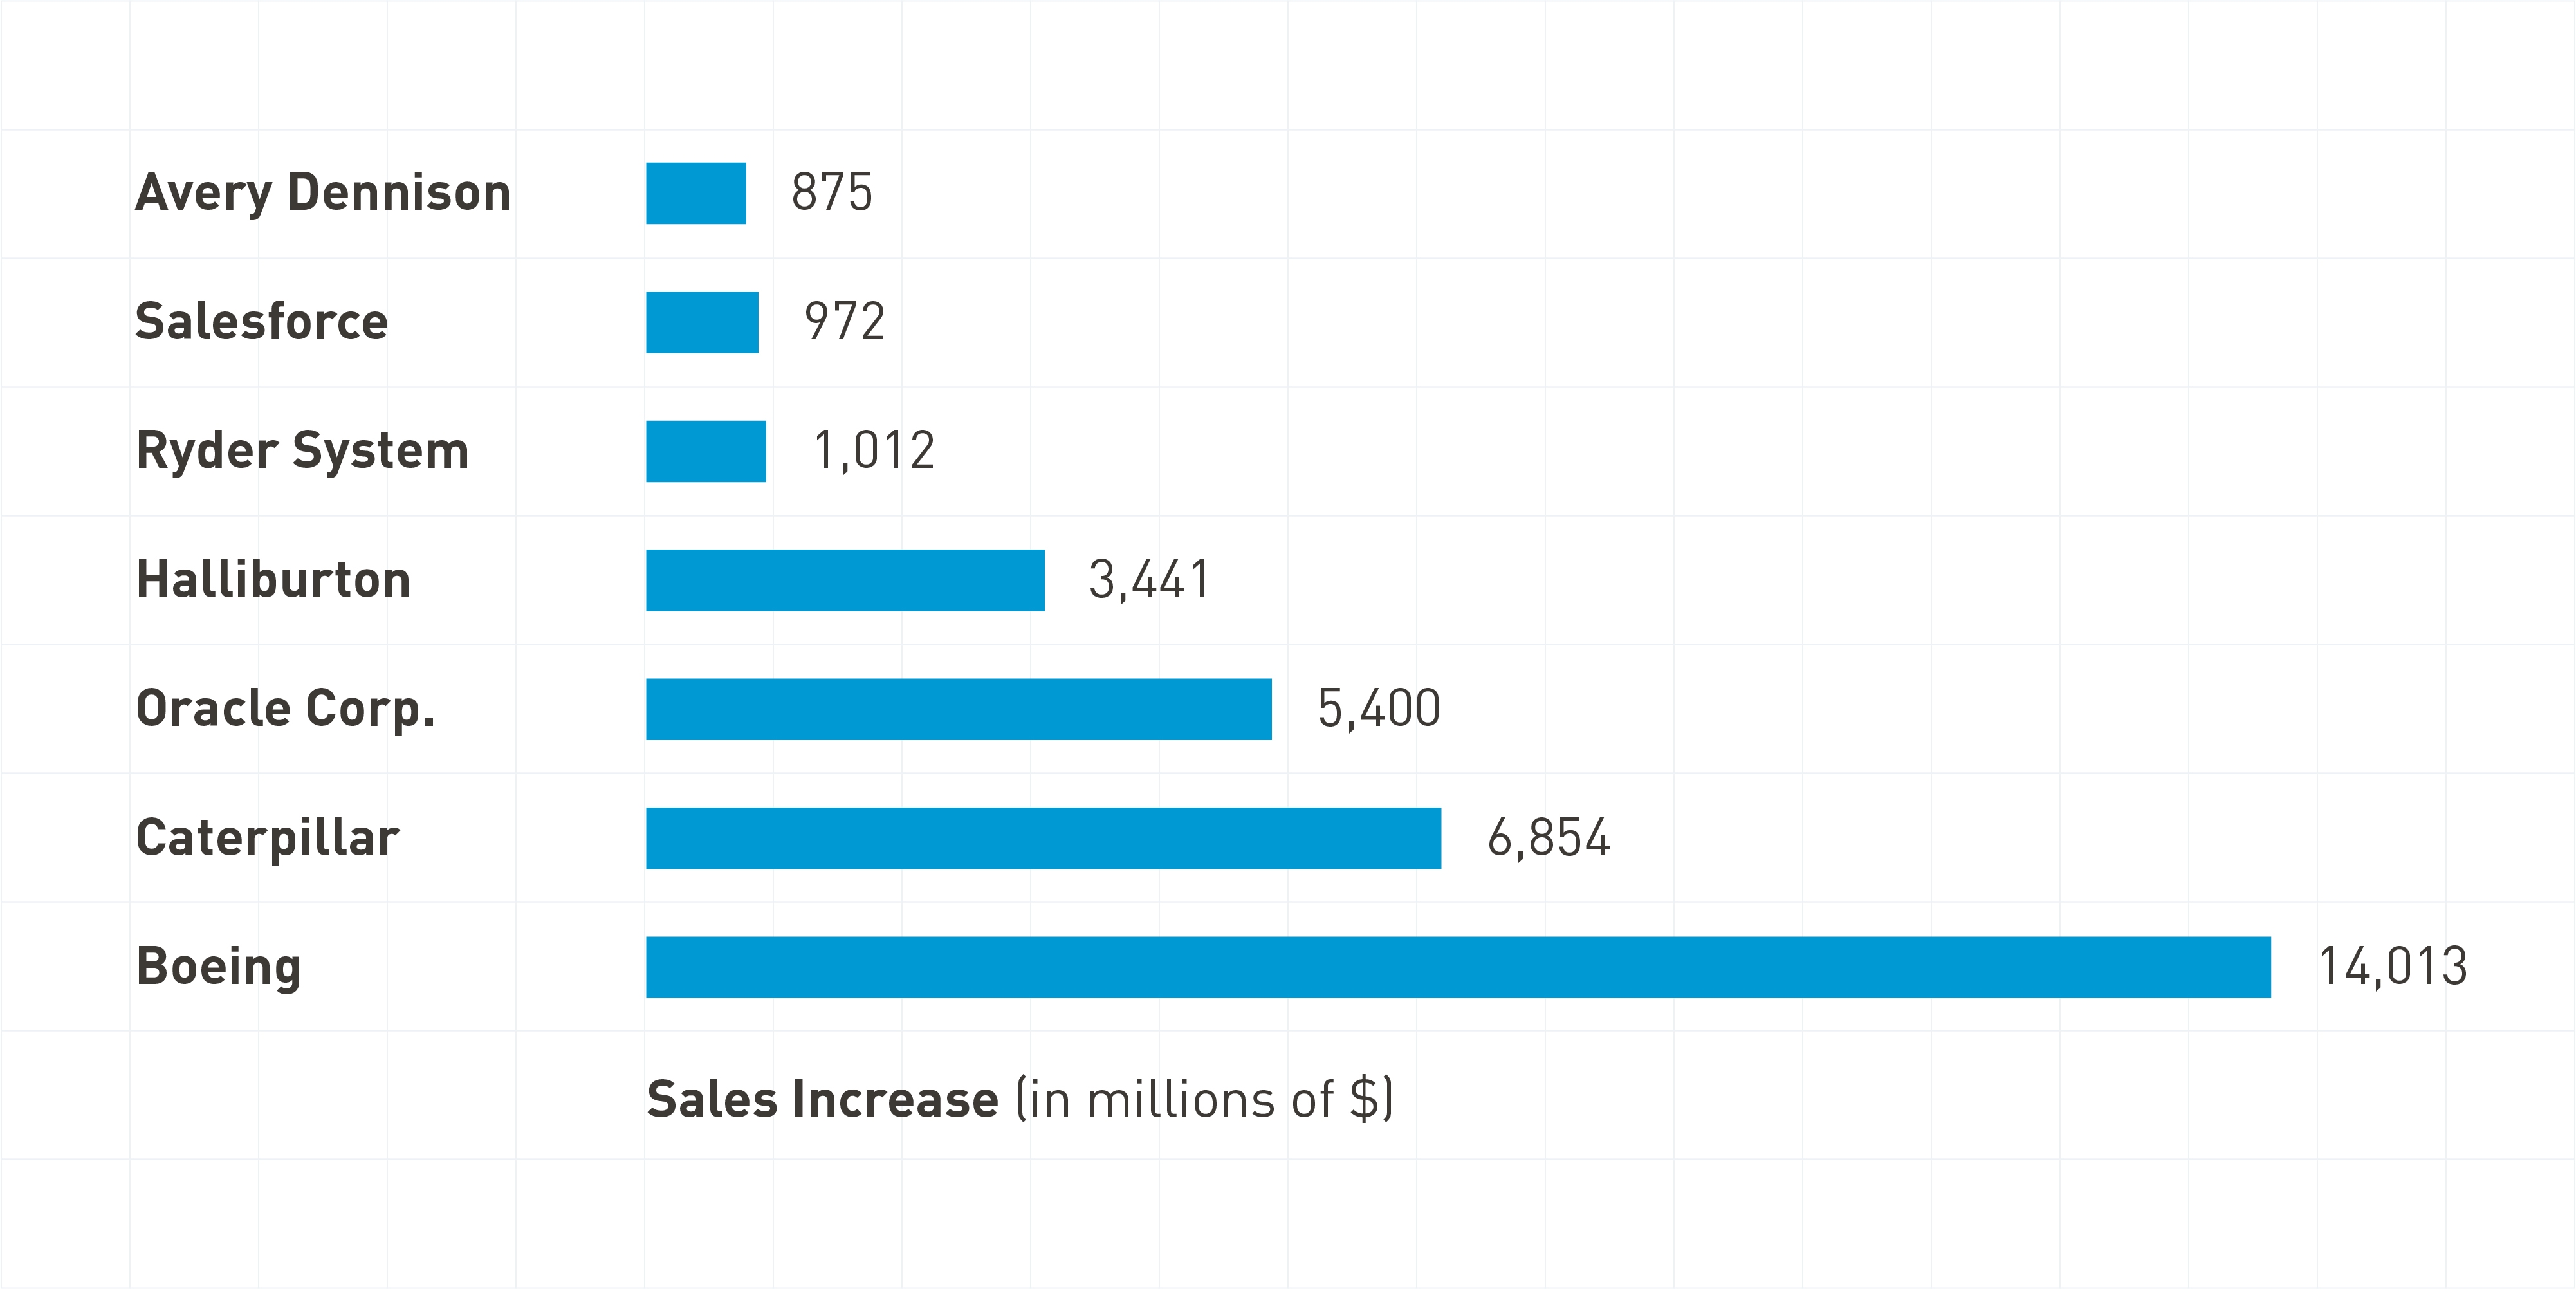 bar chart showing increase of sales from select companies 